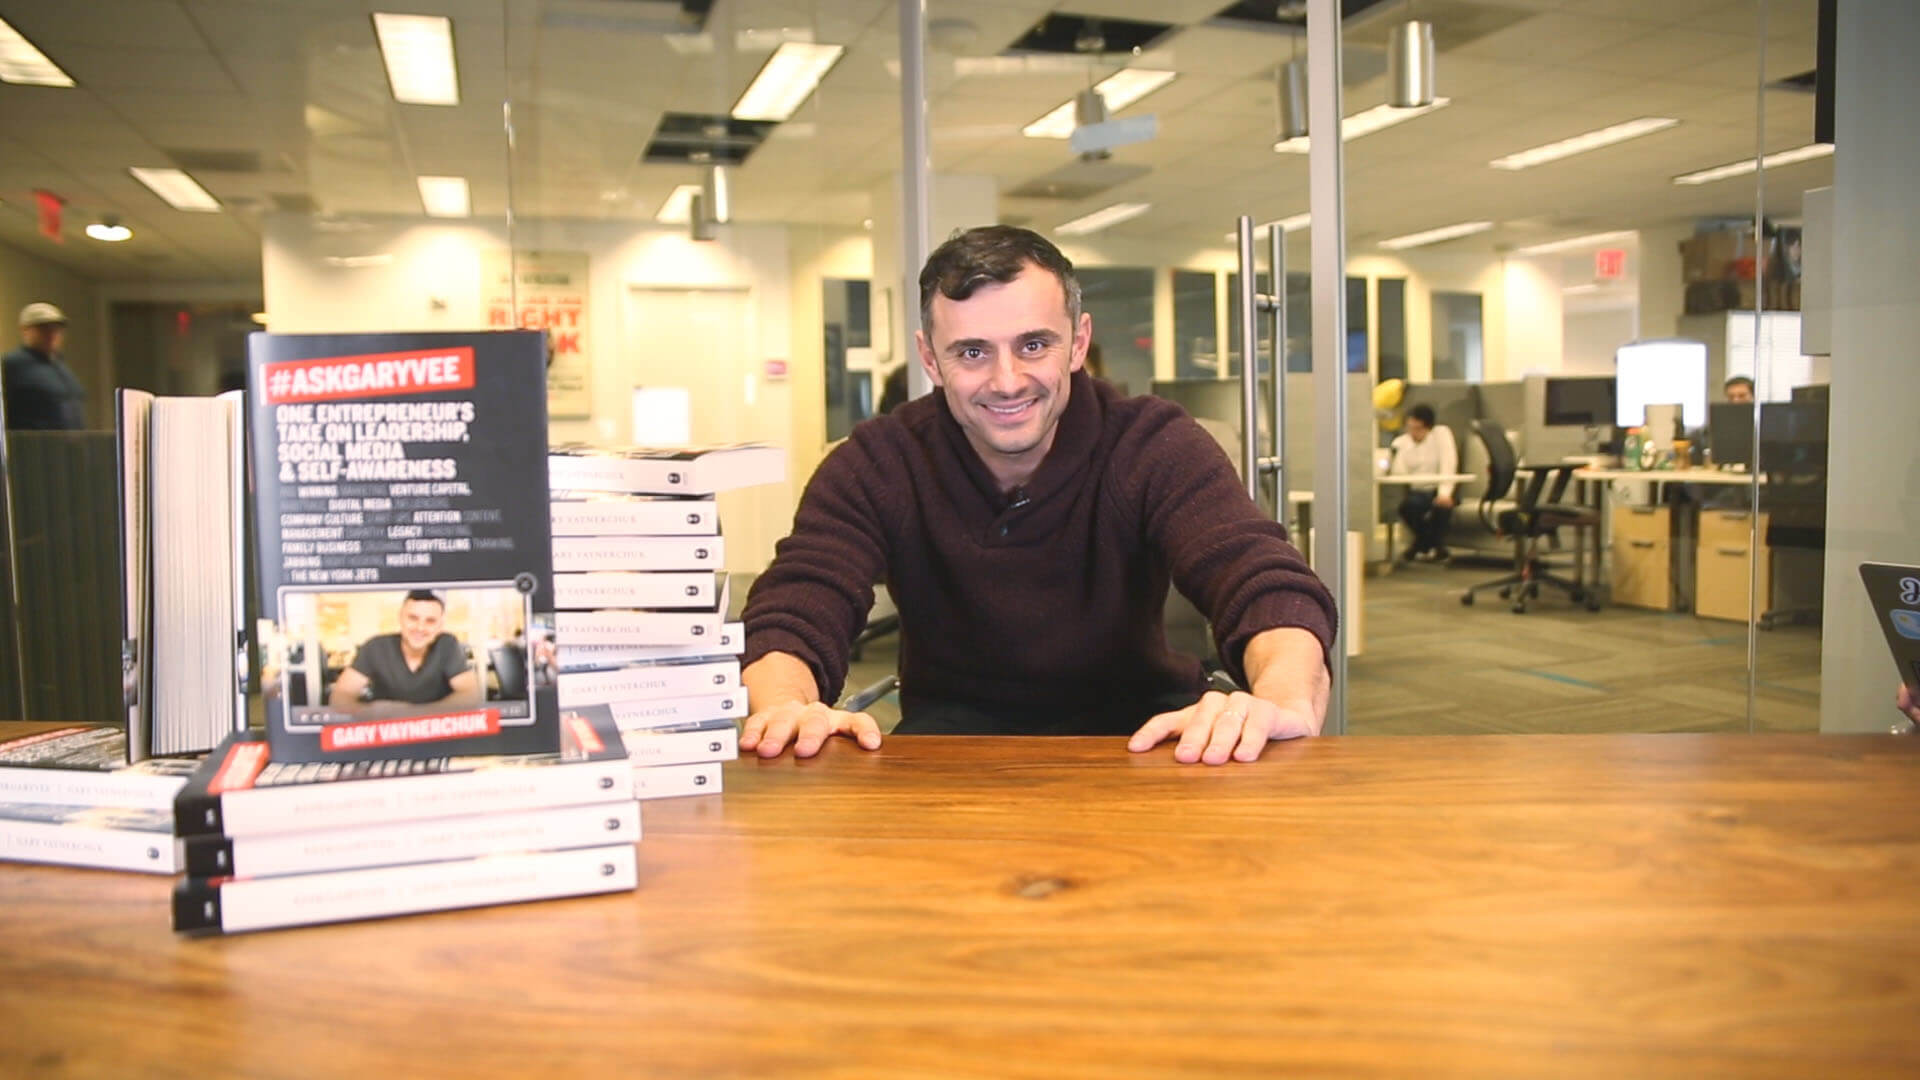 #ASKGARYVEE: The Naked Review